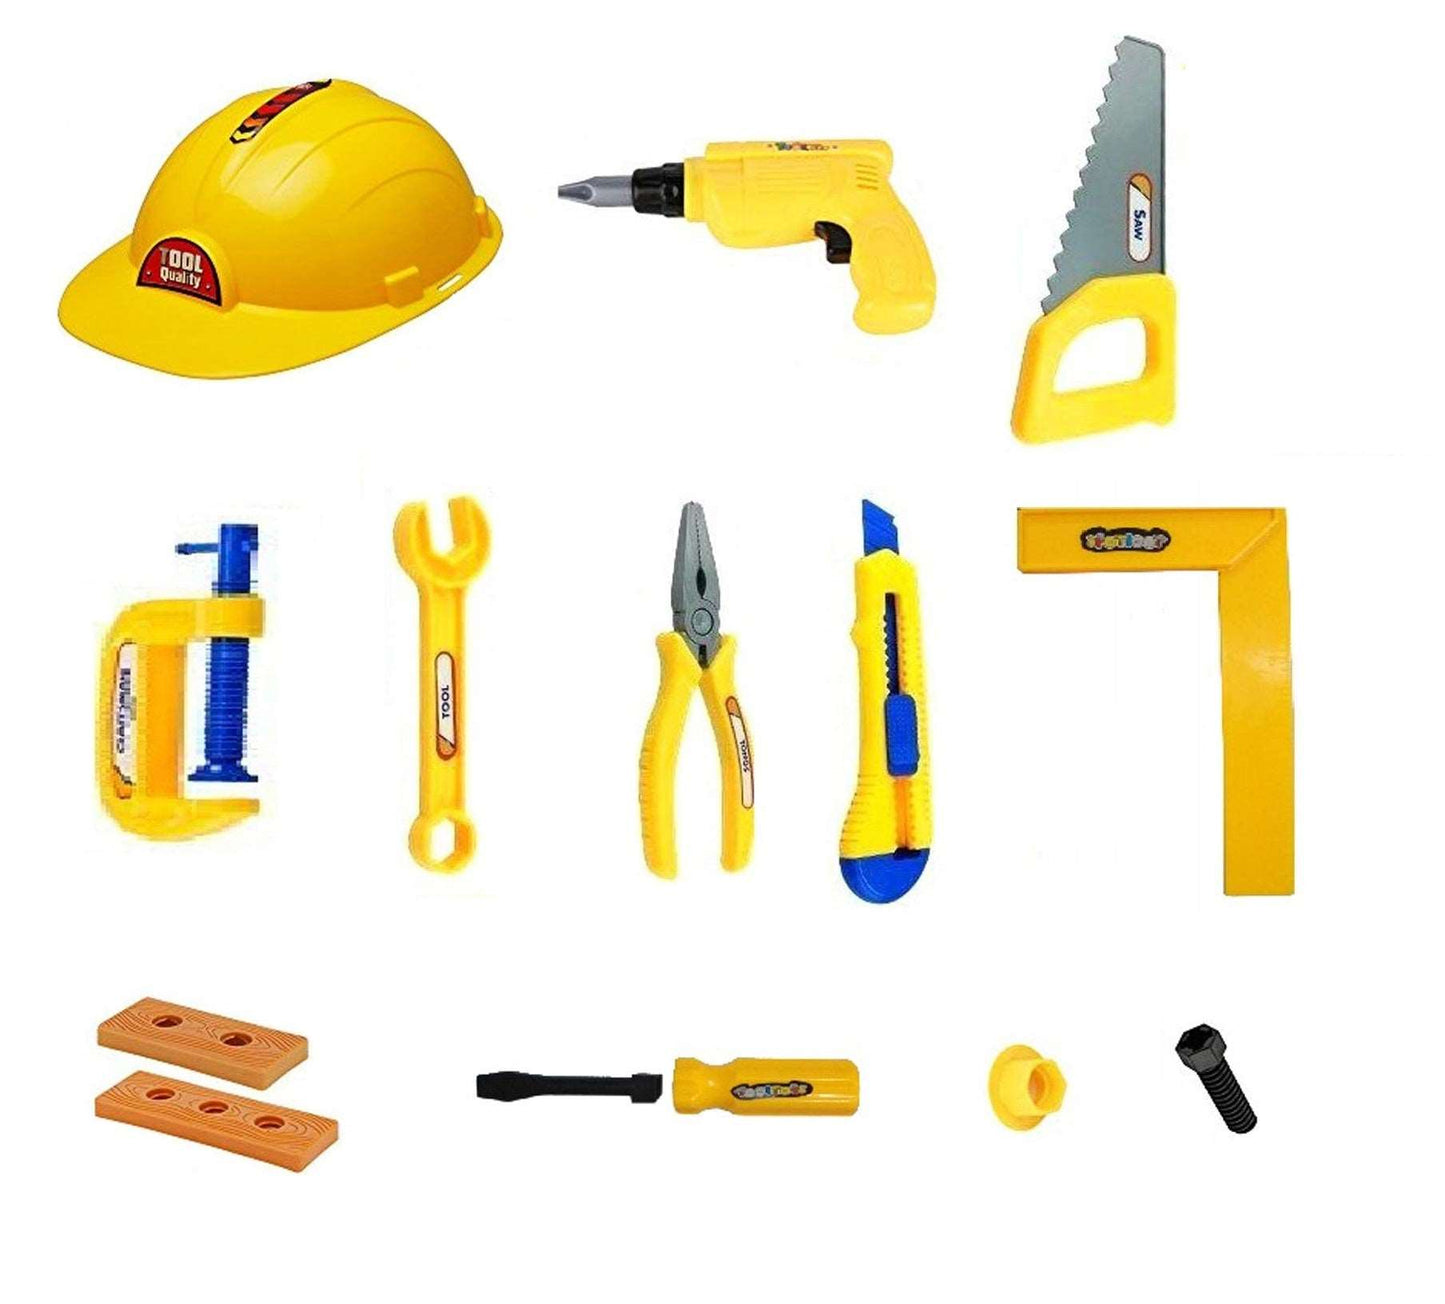 AZi Construction Tools Kit Toy Set With 13 Piece Engineering Workshop and Safety Helmet for Kids Boys